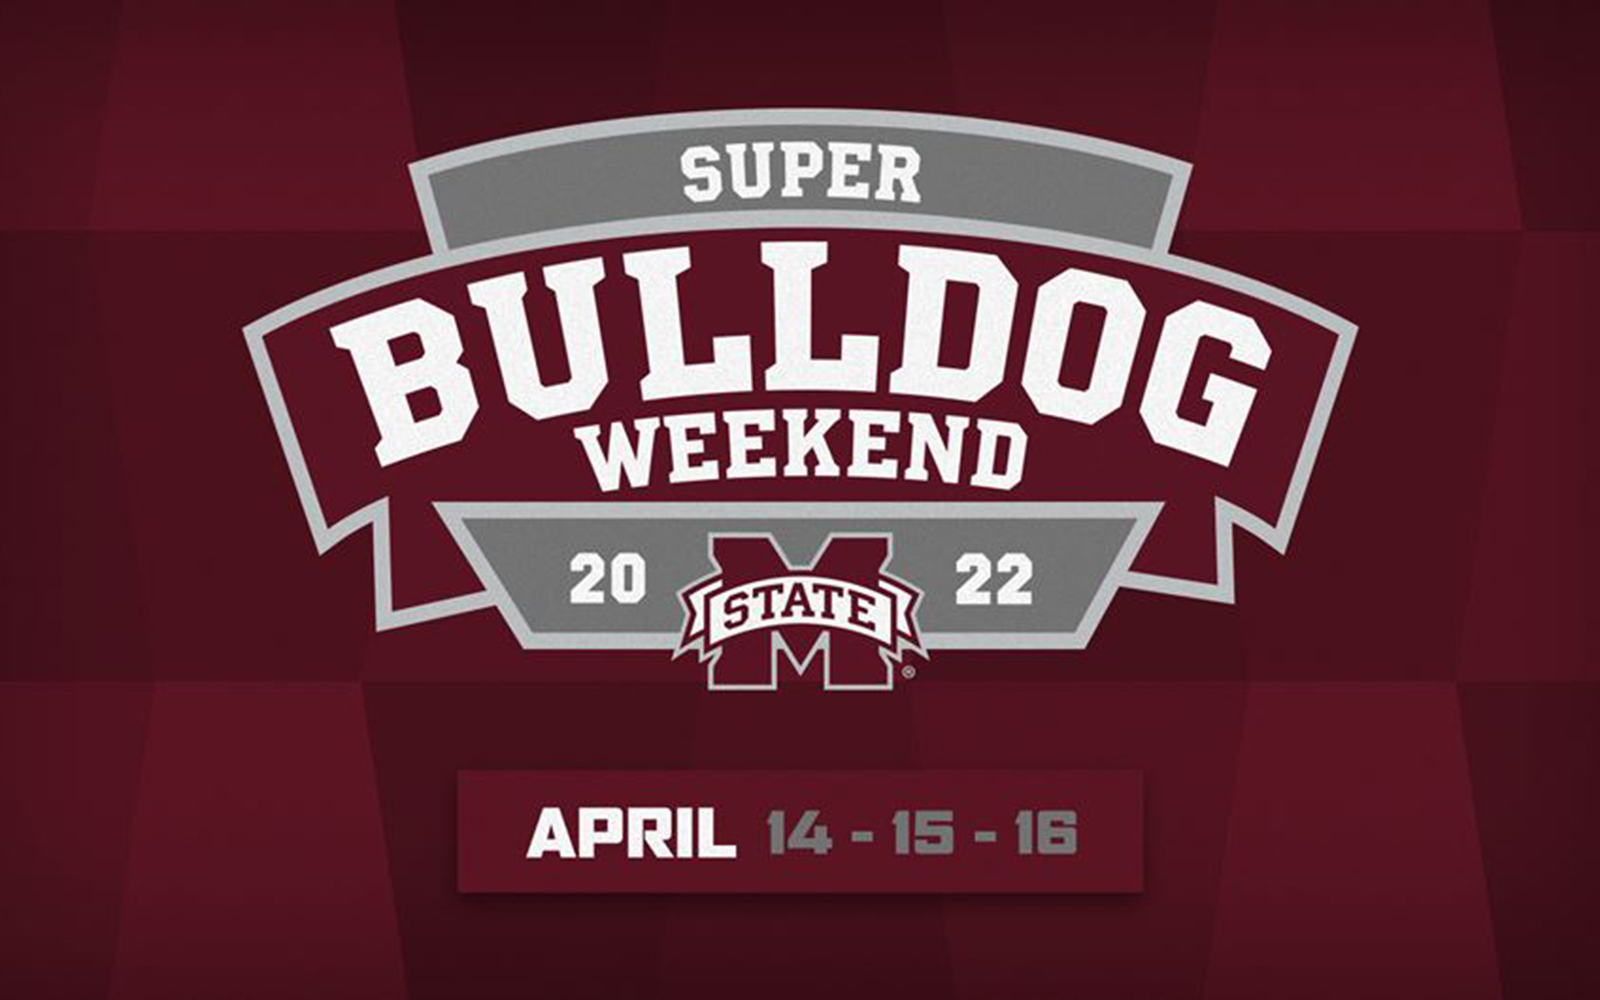 Save The Date 2022 Super Bulldog Weekend Mississippi State University